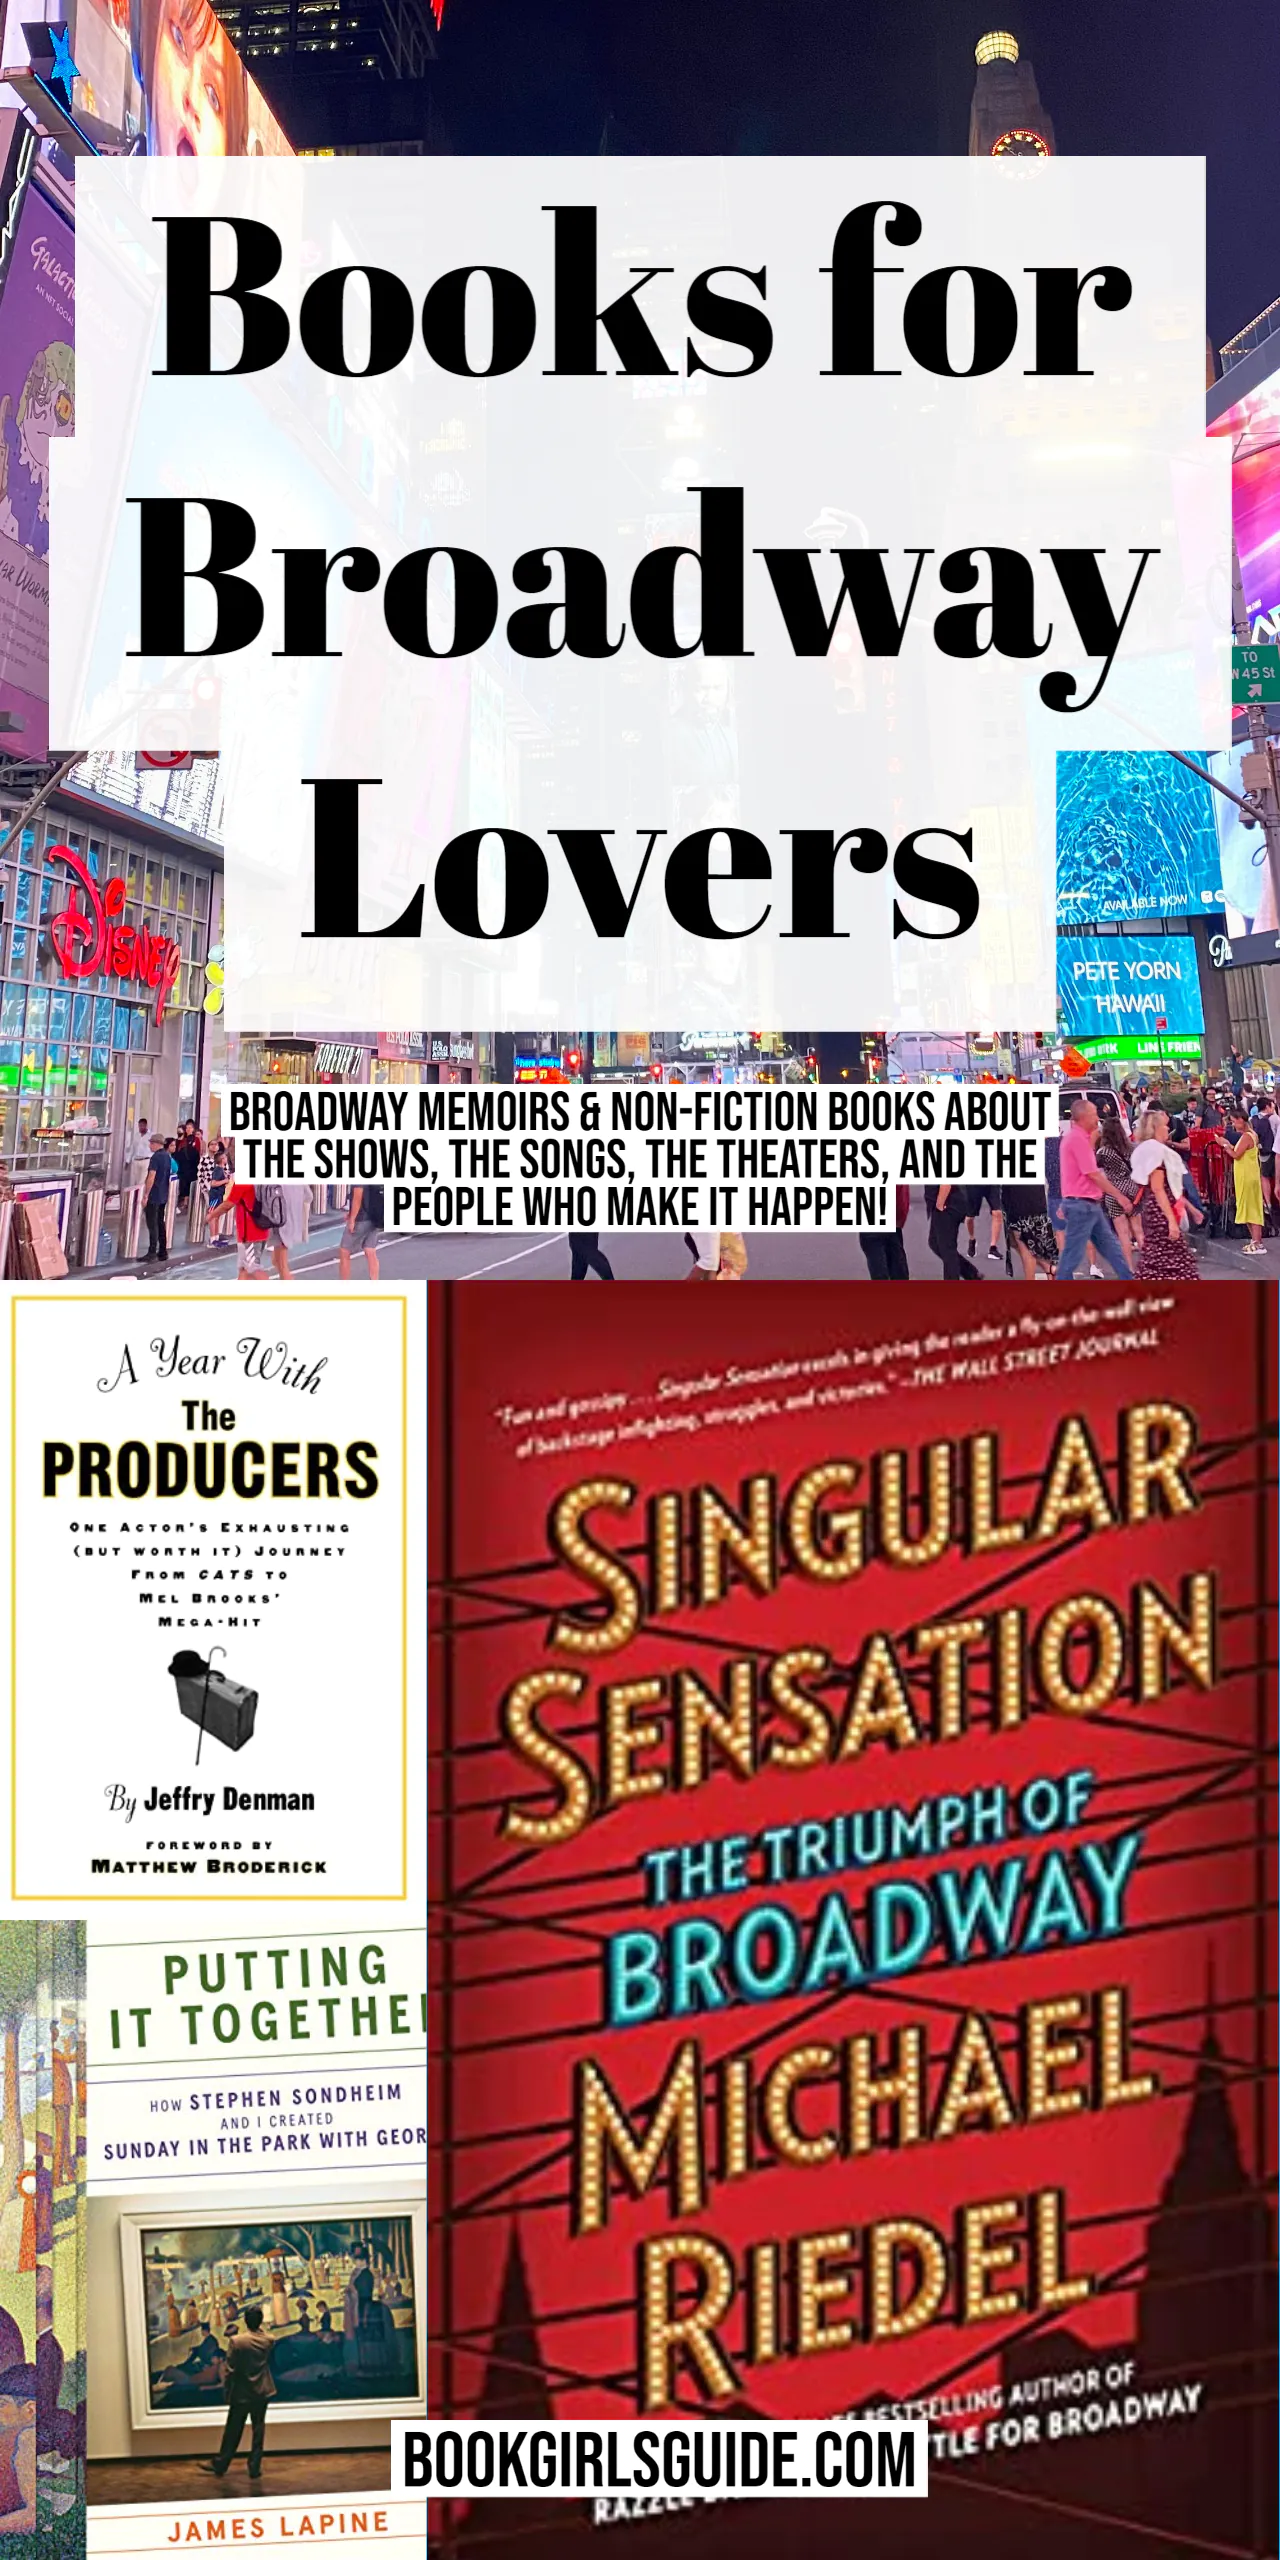 Books for Broadway Lovers heading with the cover of three non-fiction books